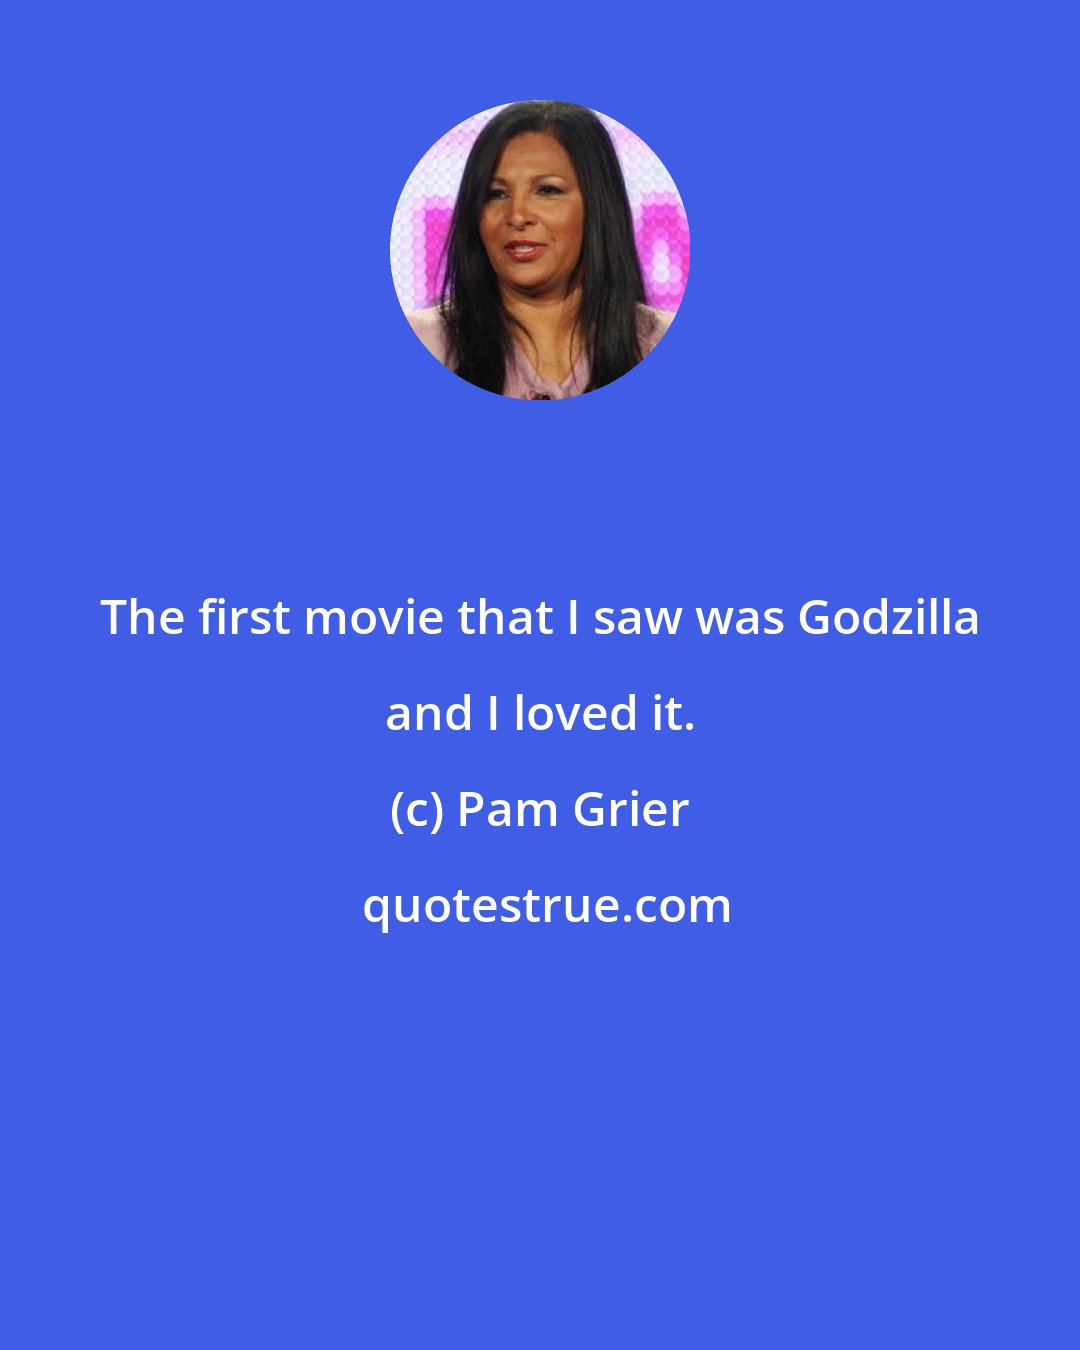 Pam Grier: The first movie that I saw was Godzilla and I loved it.